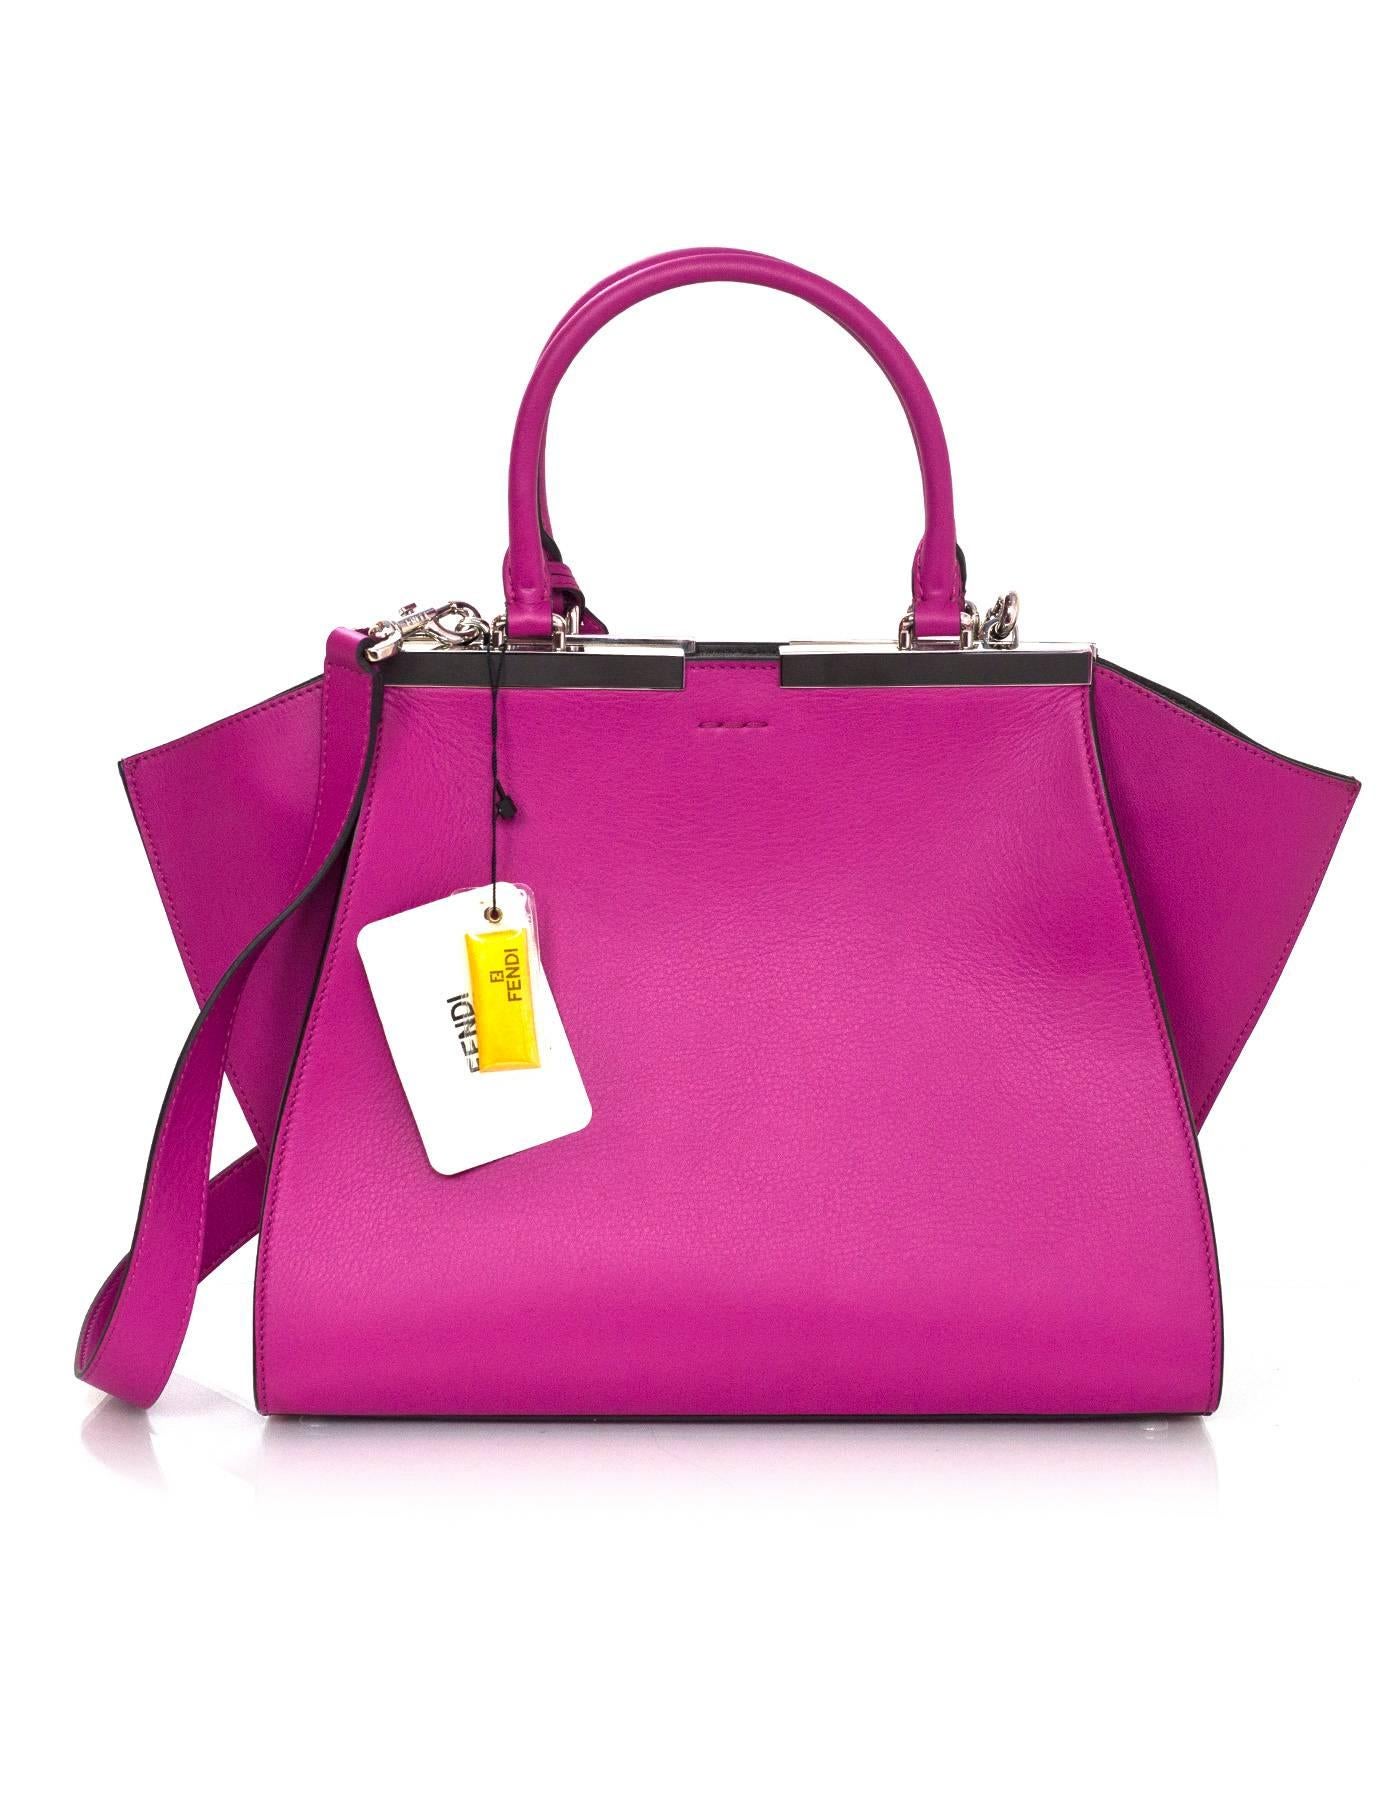 Women's Fendi Pink Leather 3Jours Handle Bag with Tags rt. $2, 400